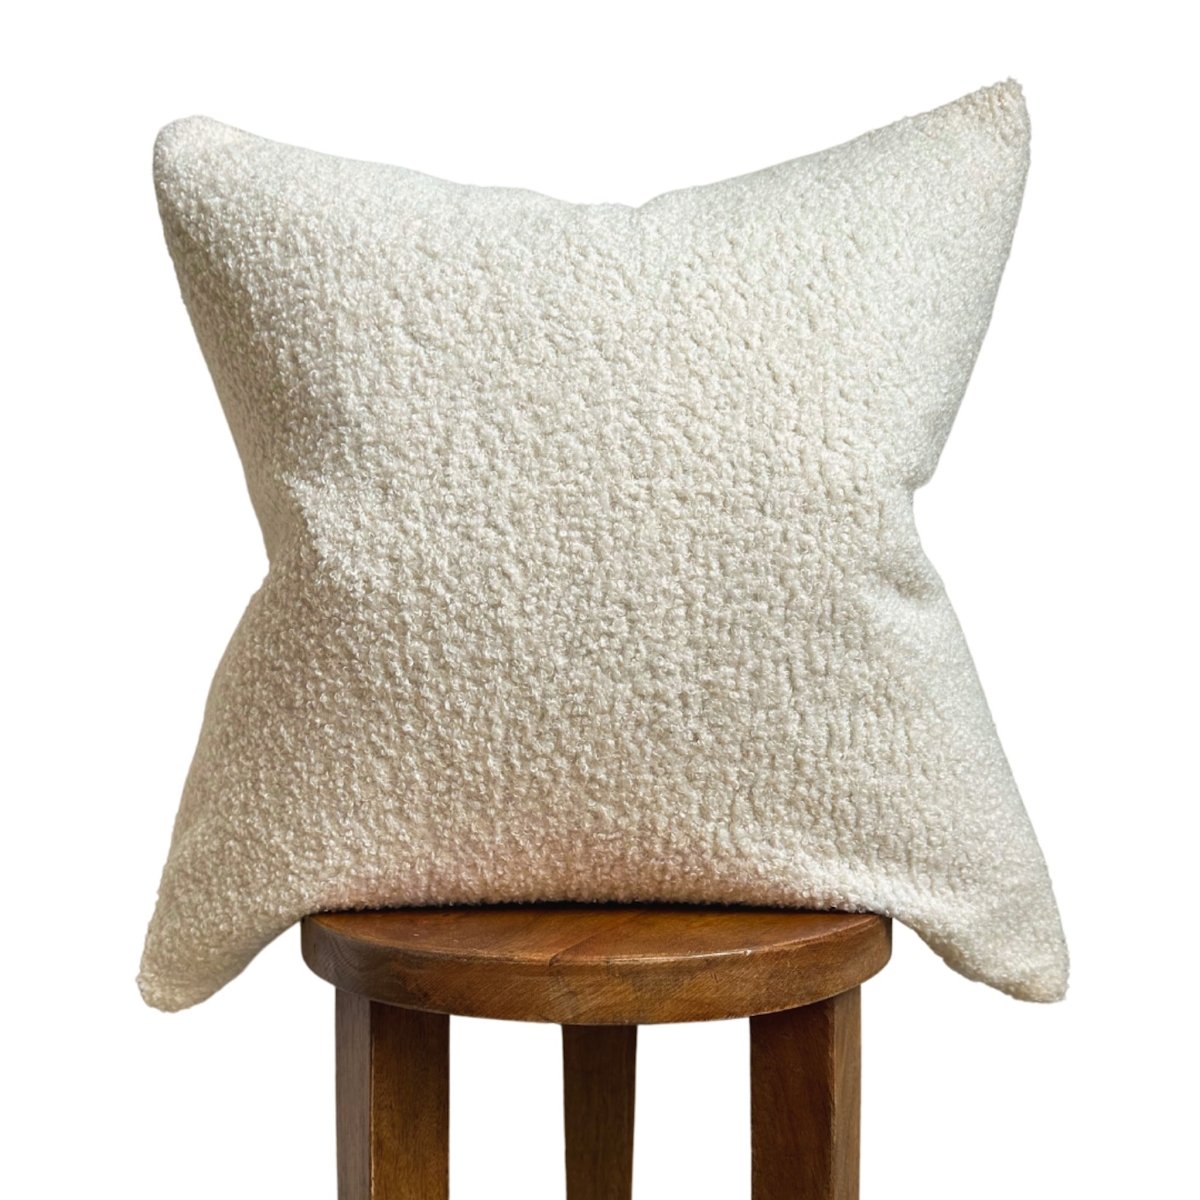 Busa Designs Vienna Teddy Pillow Cover - lily & onyx